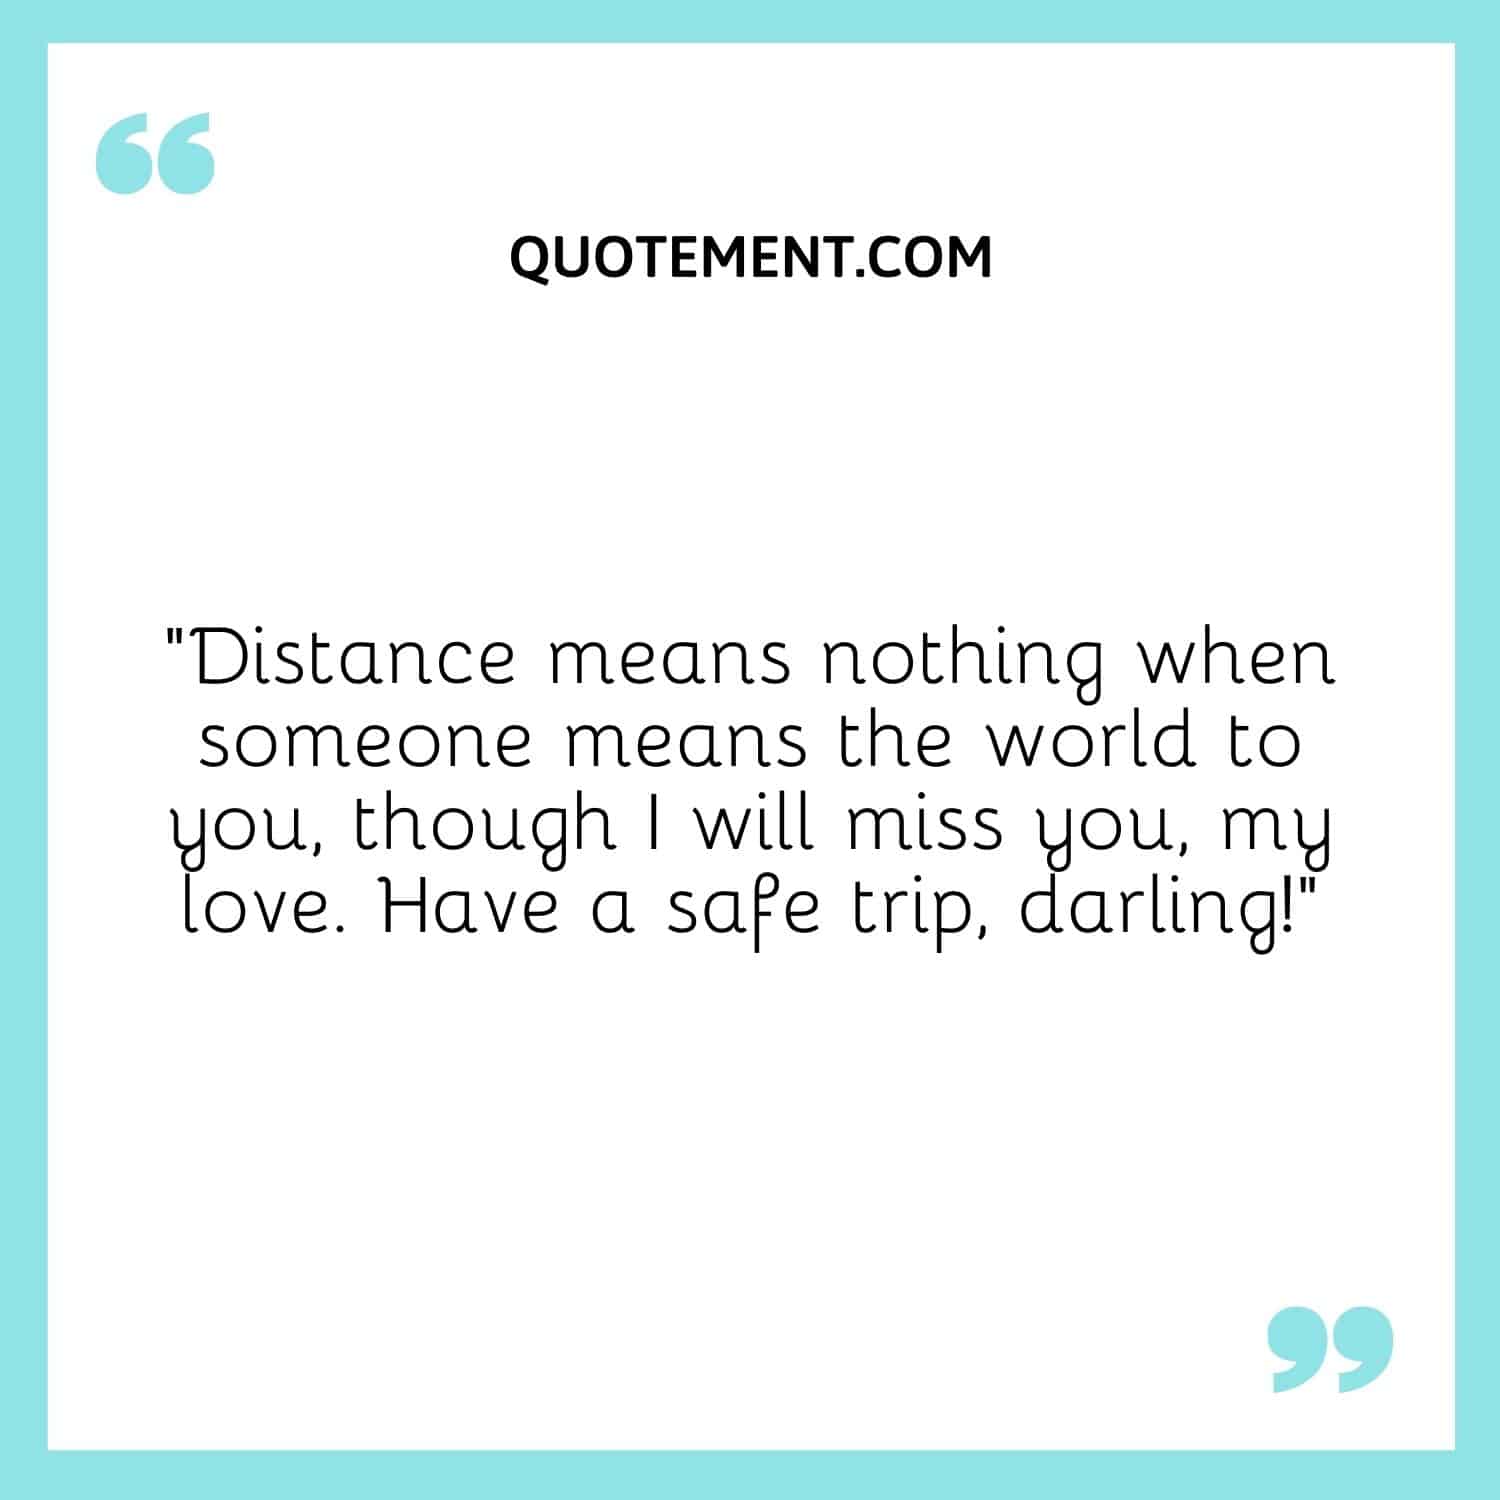 “Distance means nothing when someone means the world to you, though I will miss you, my love. Have a safe trip, darling!”